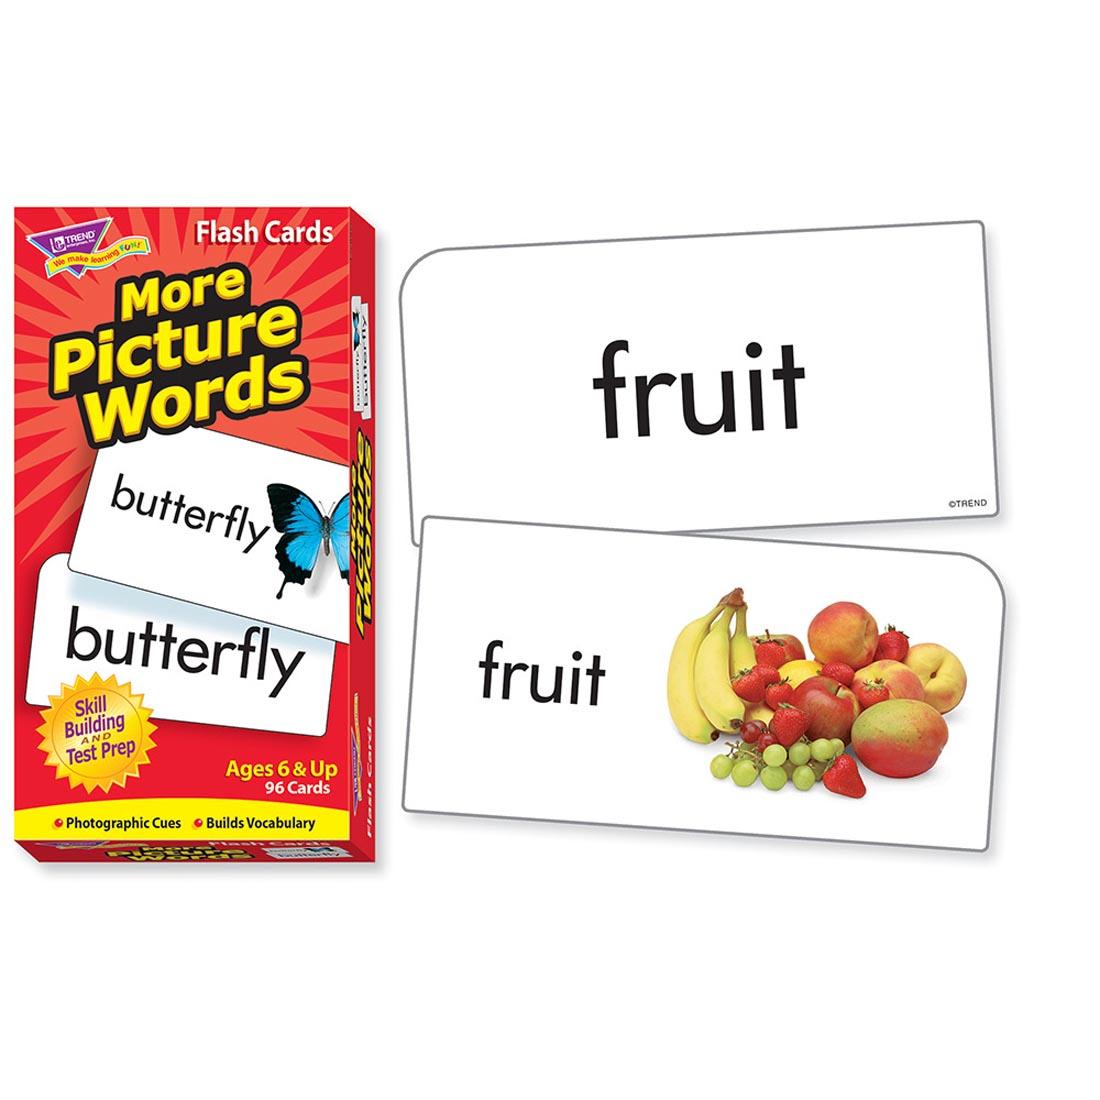 TREND More Picture Words Flash Cards